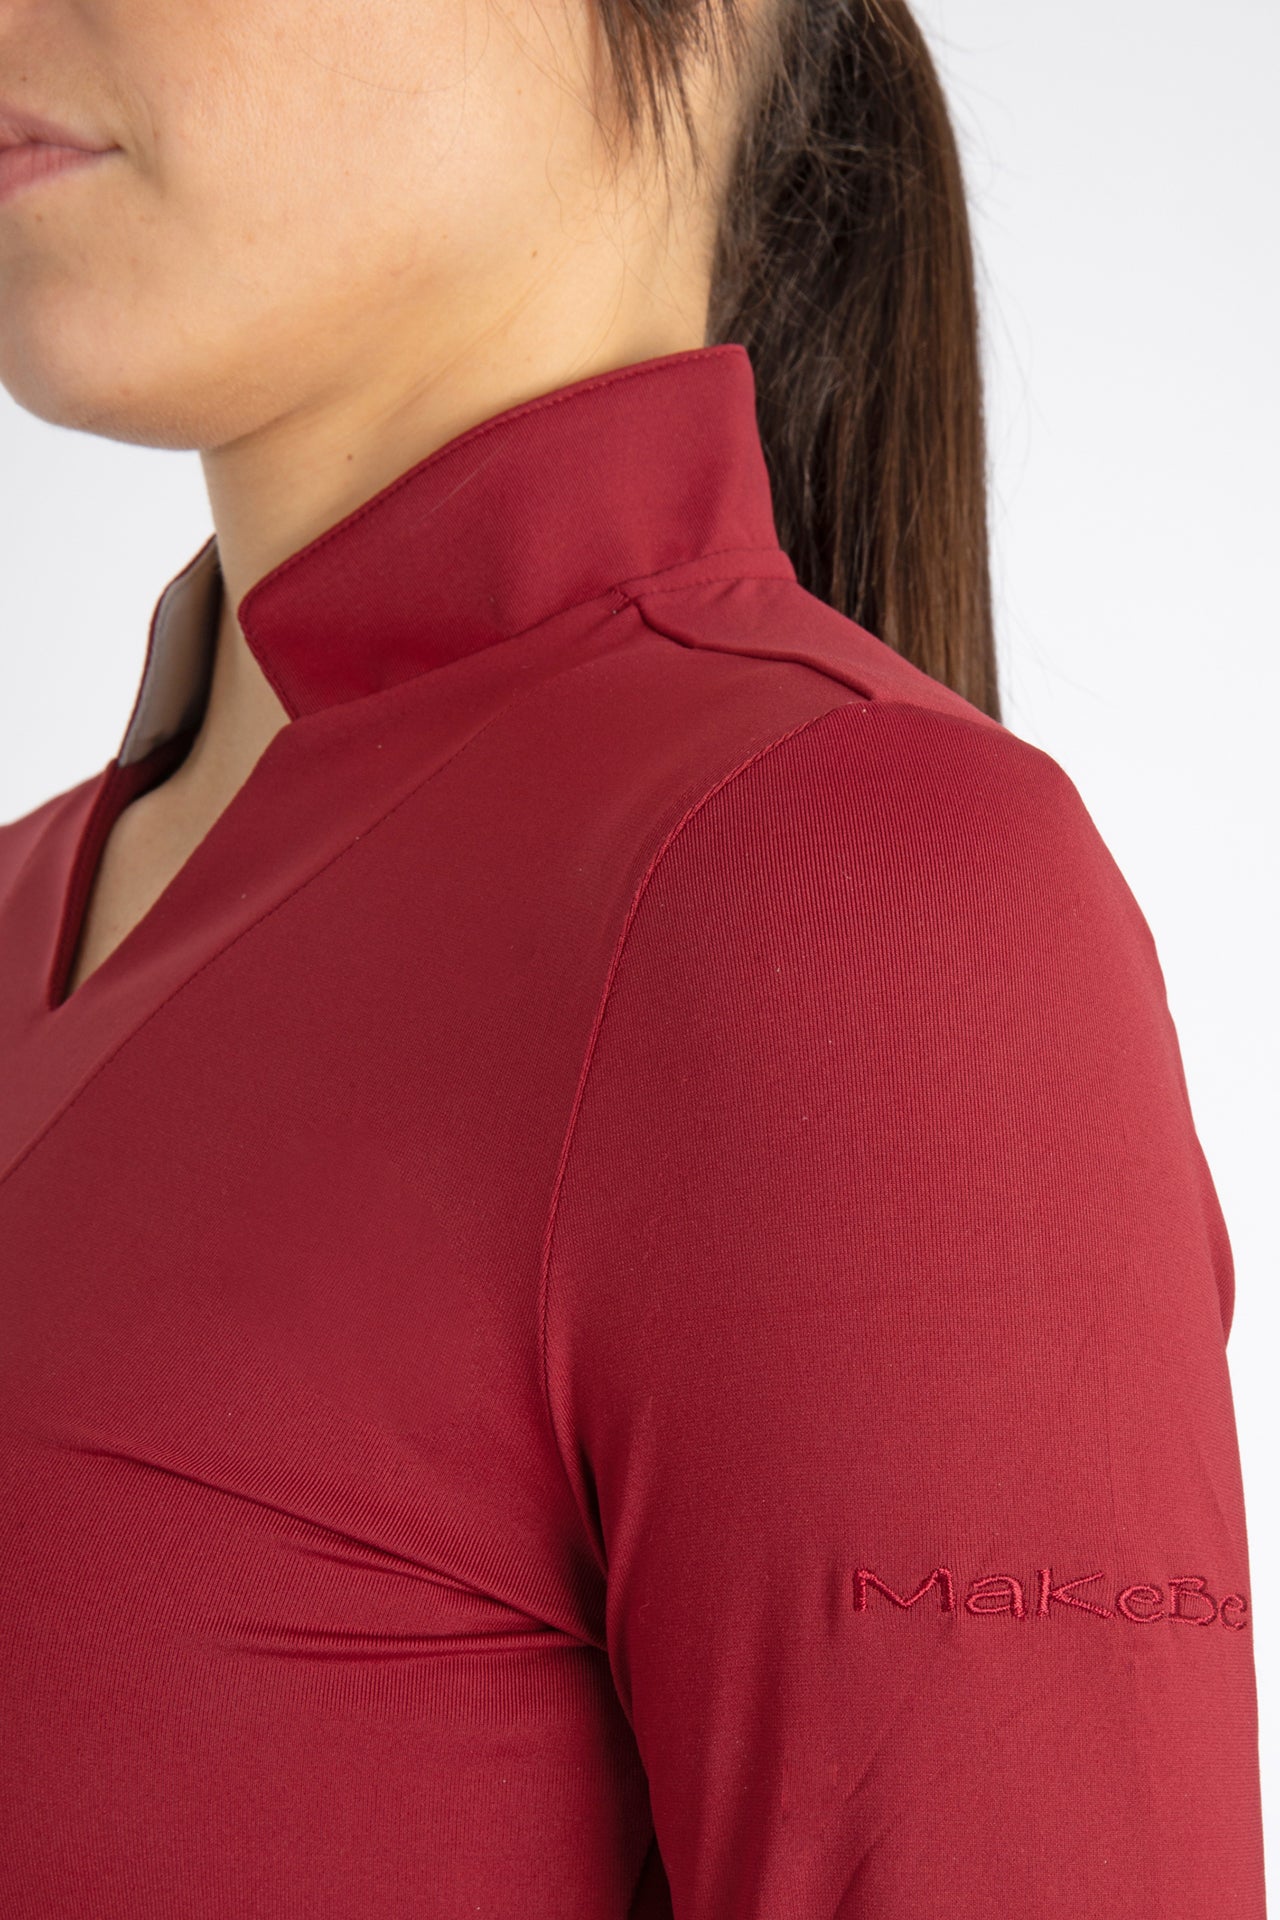 Makebe - Wendy Long Sleeve - Cheval Equestrian Inc.